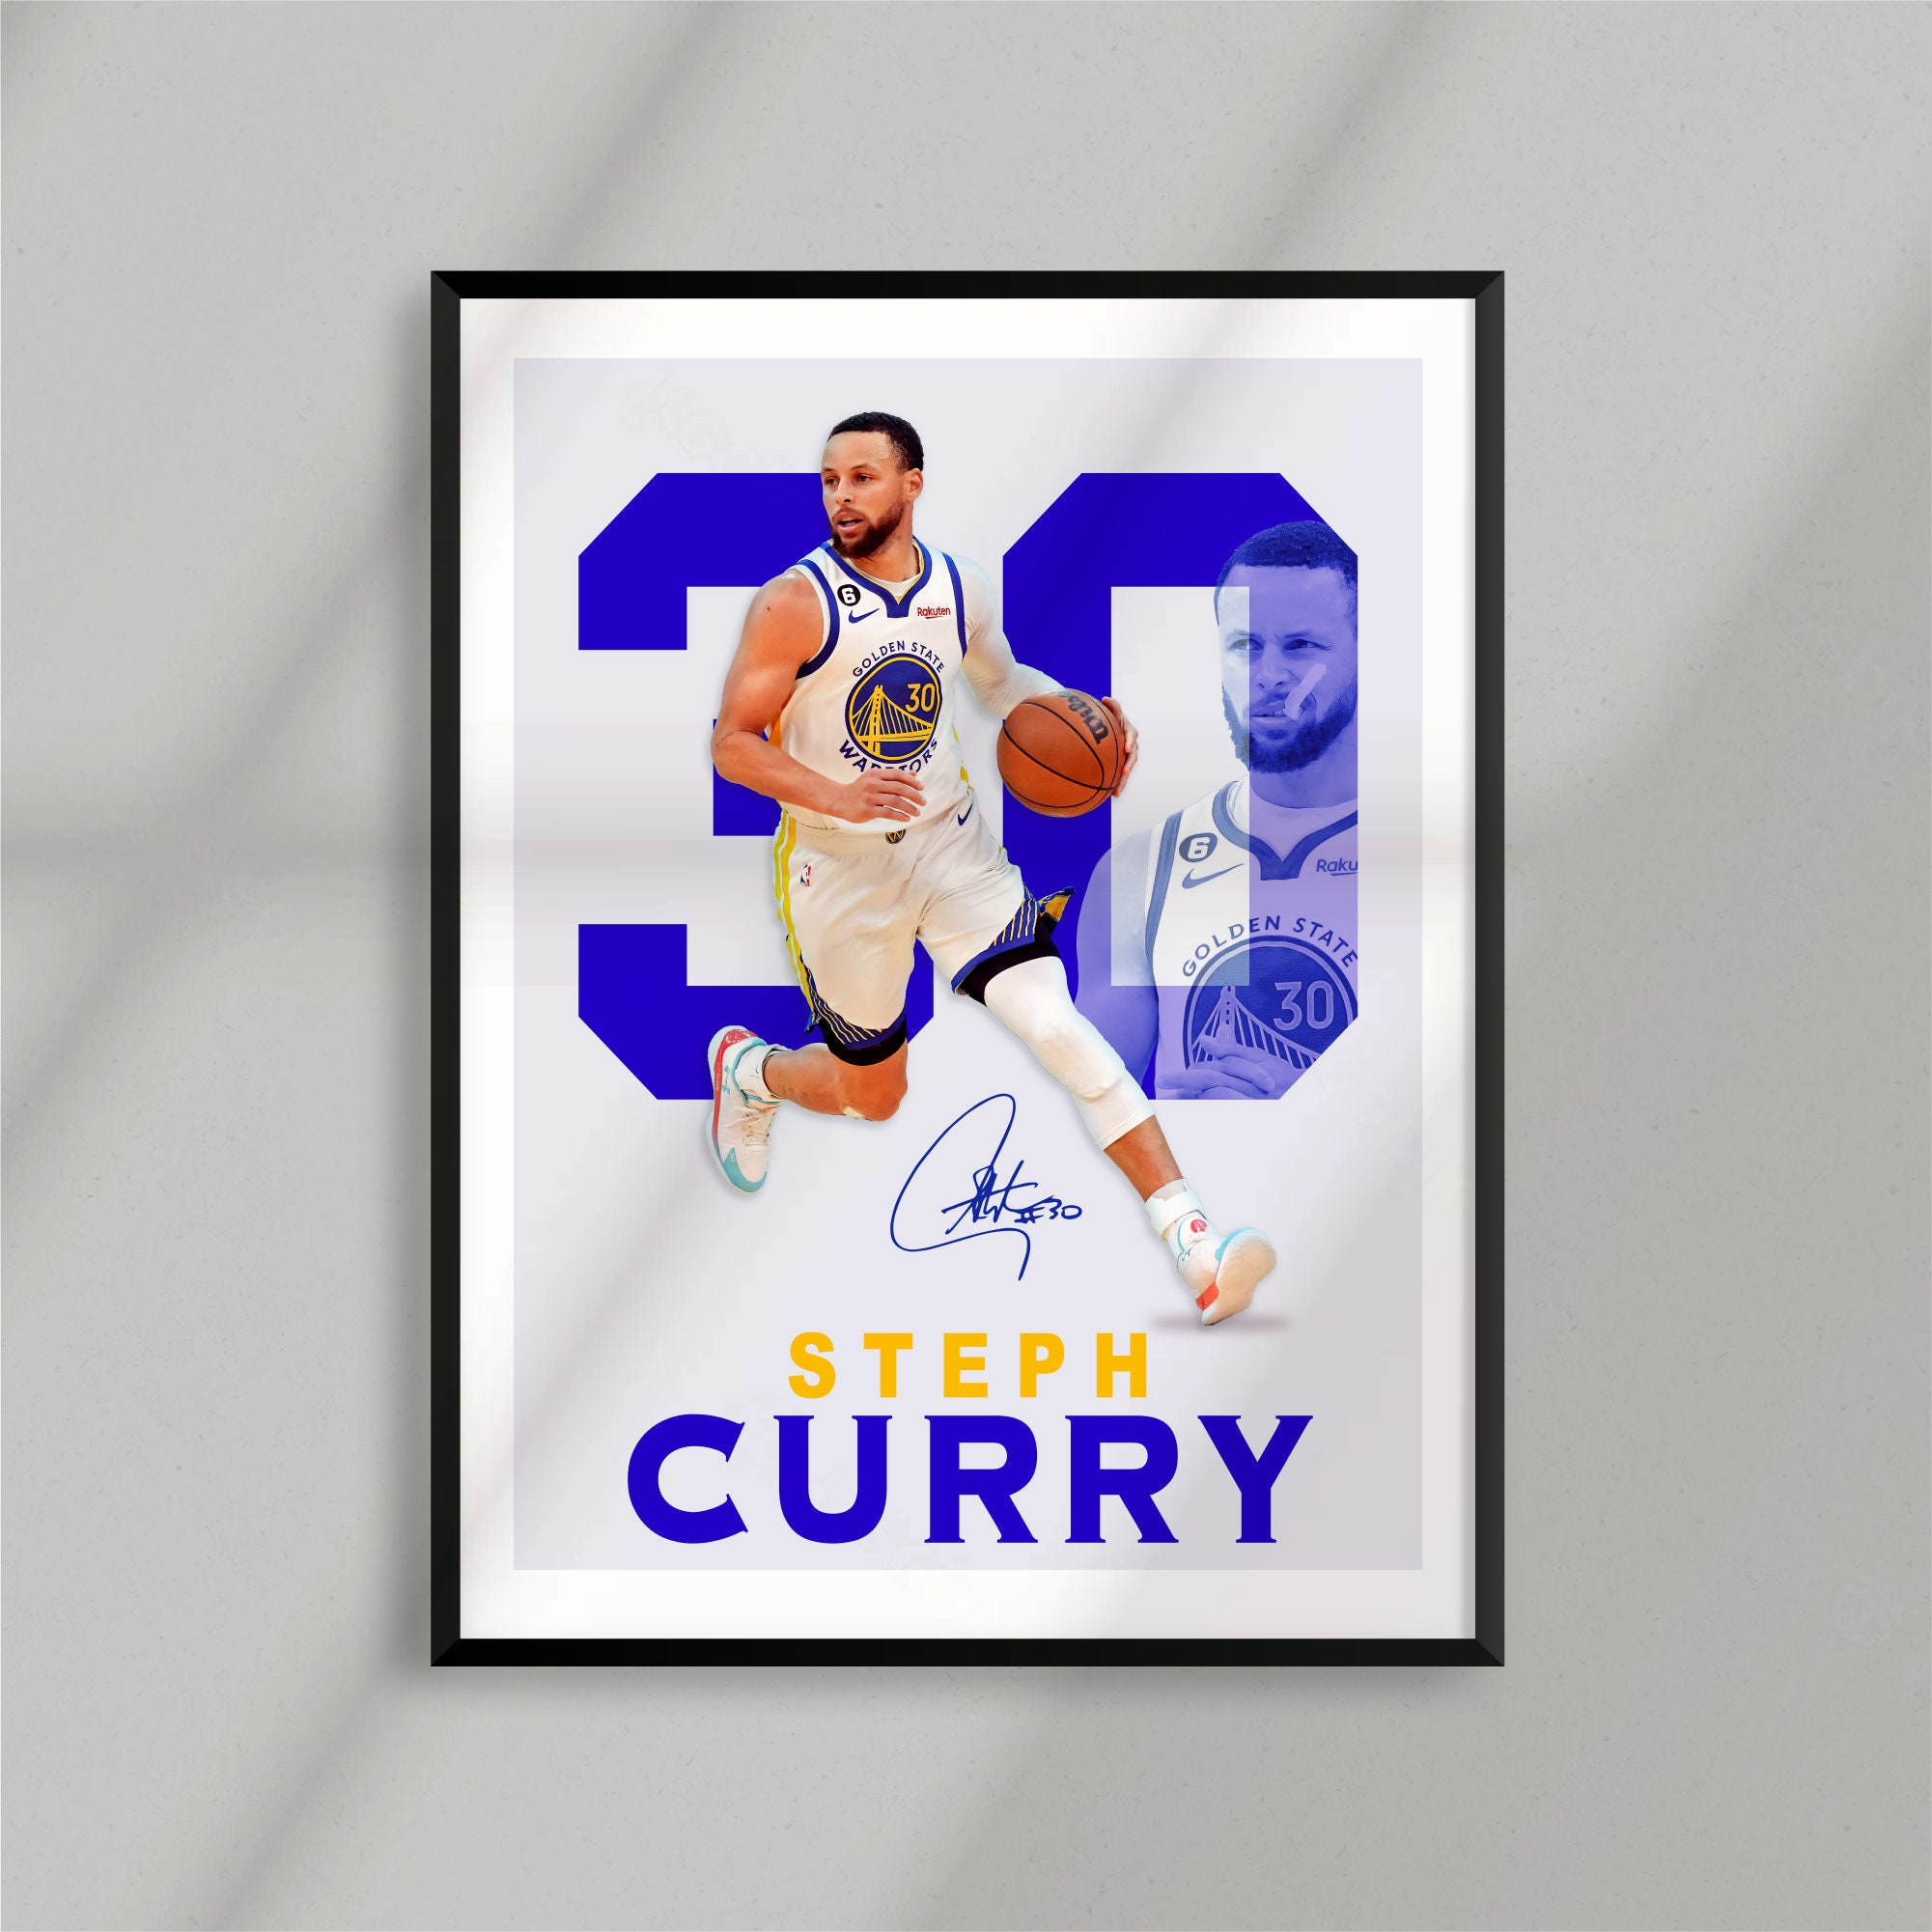 Steph Curry Word Art Poster | Golden State Warriors Gifts & Decor - 16x20 Standard Size Print